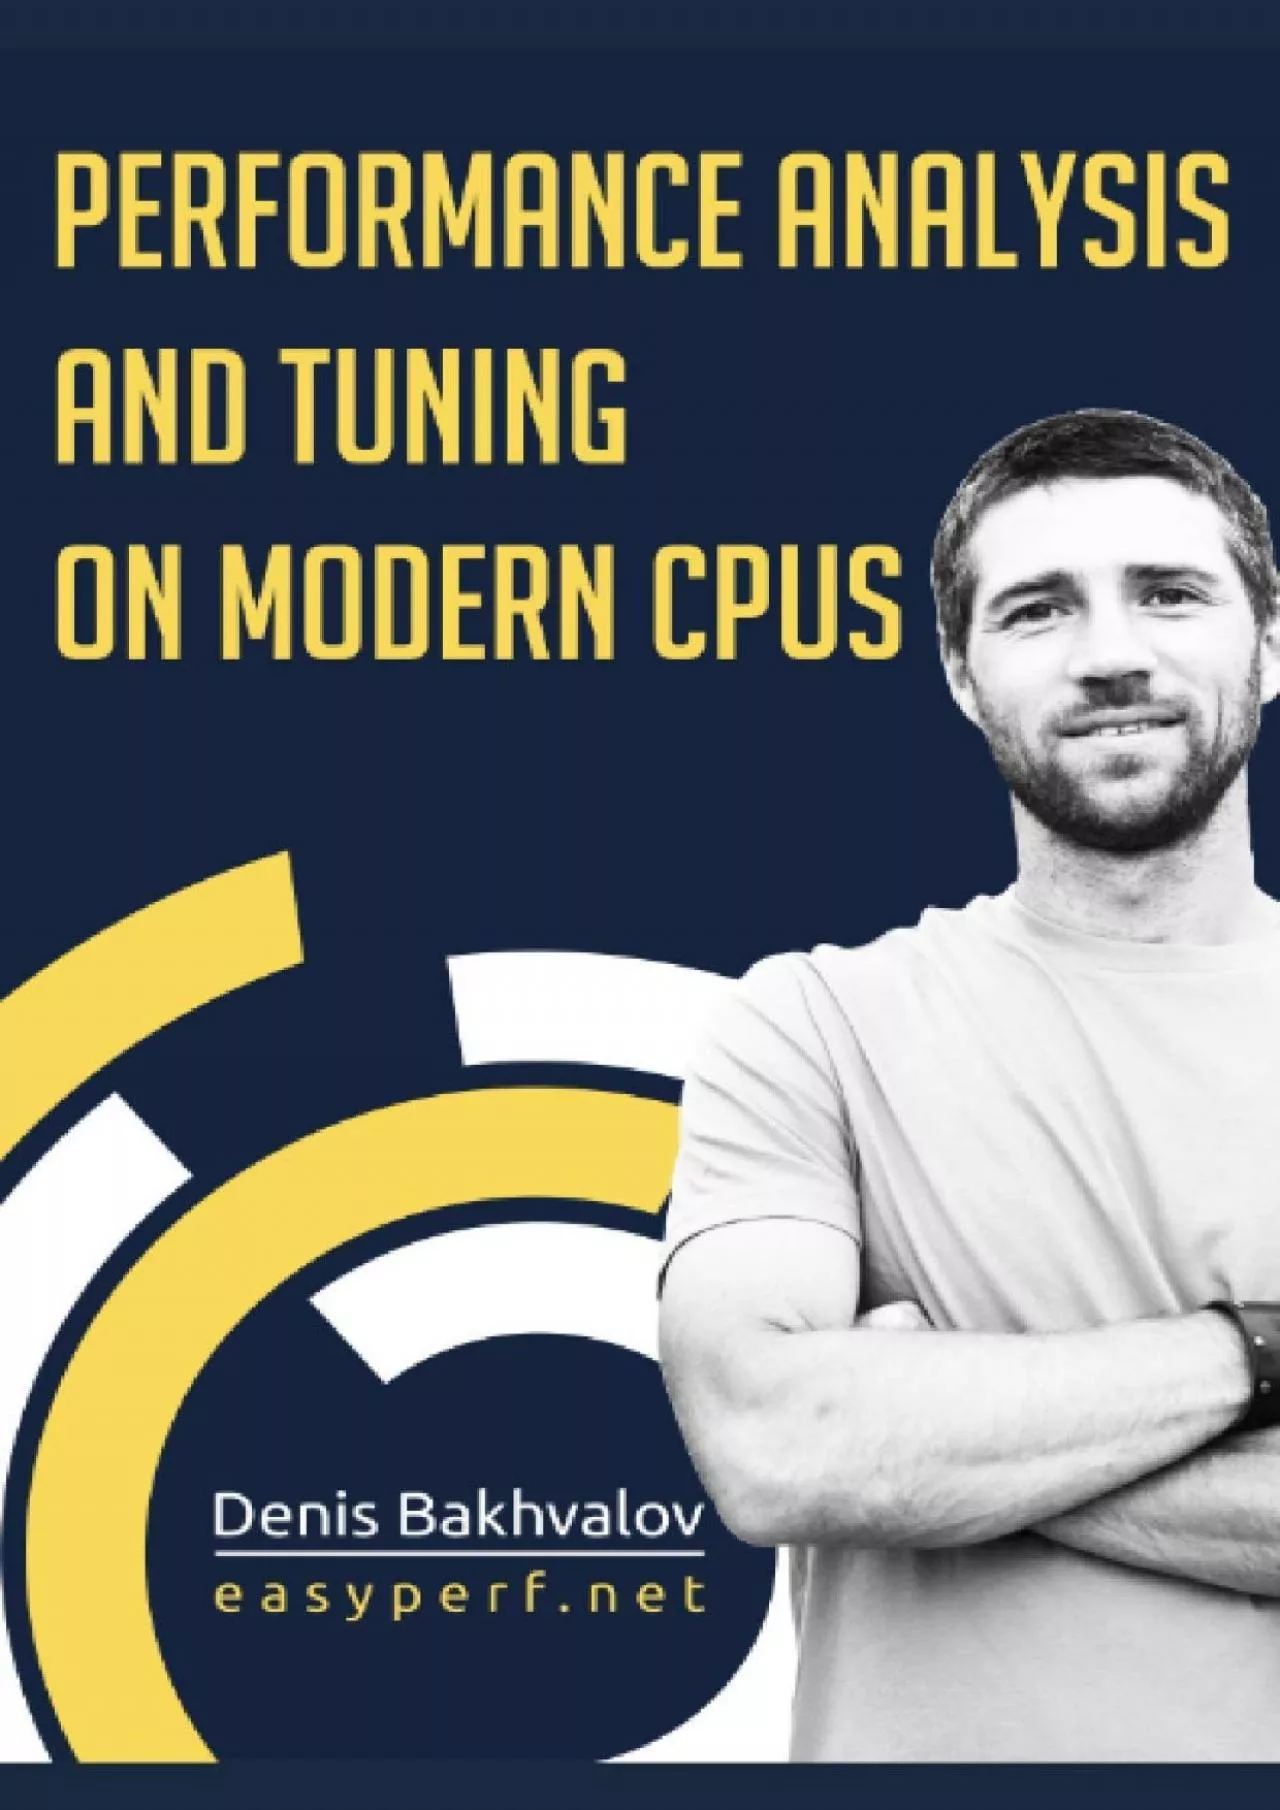 [PDF]-Performance Analysis and Tuning on Modern CPUs: Squeeze the last bit of performance